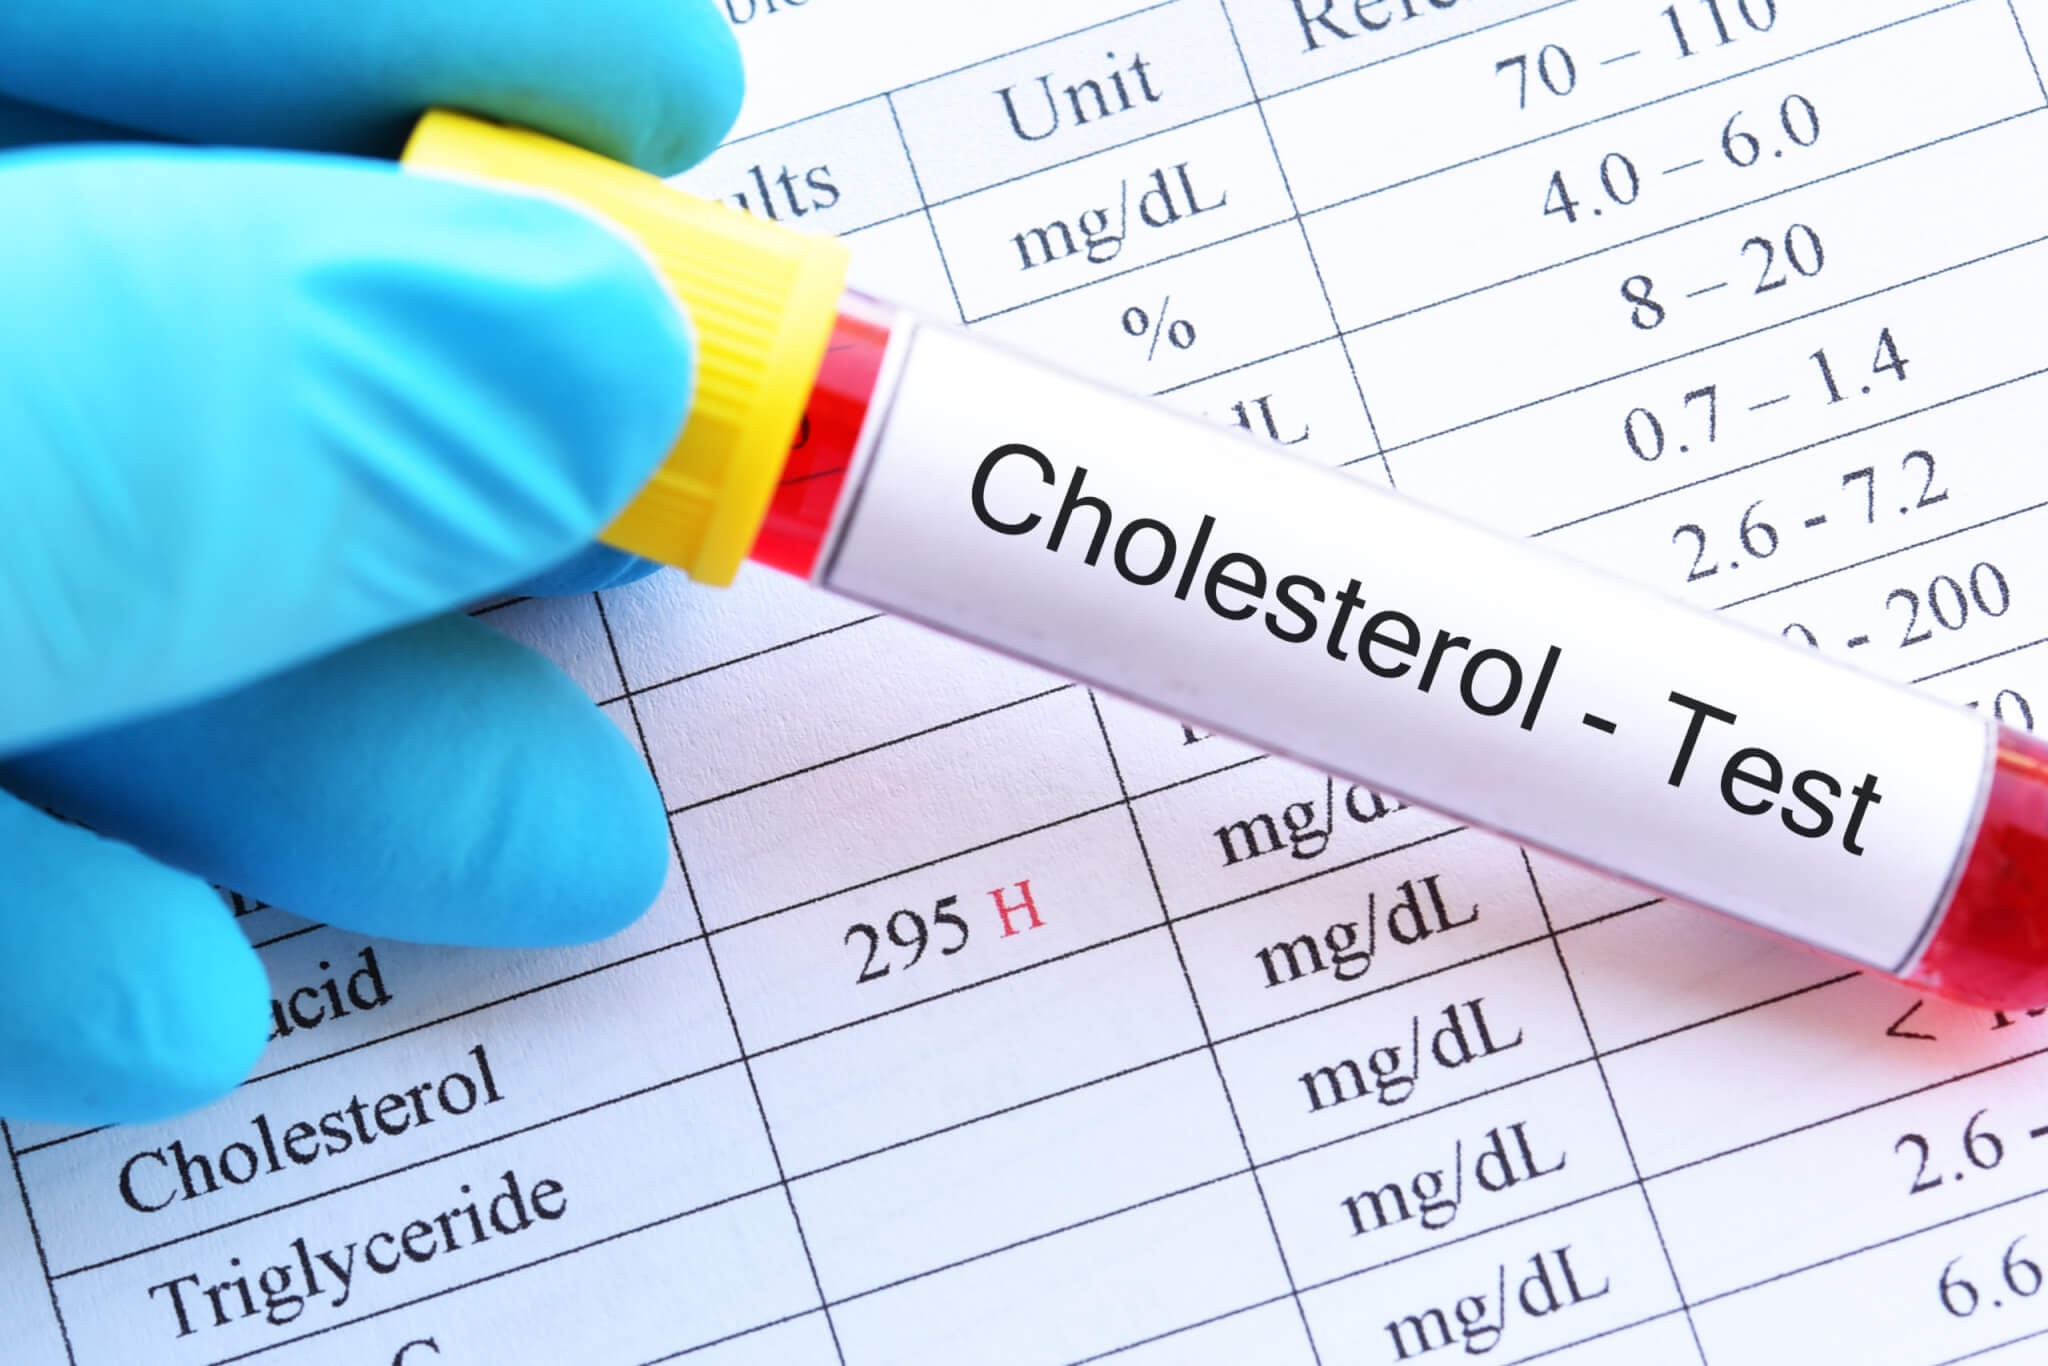 Too much cholesterol speeds up formation of toxic plaques that cause Alzheimer’s disease